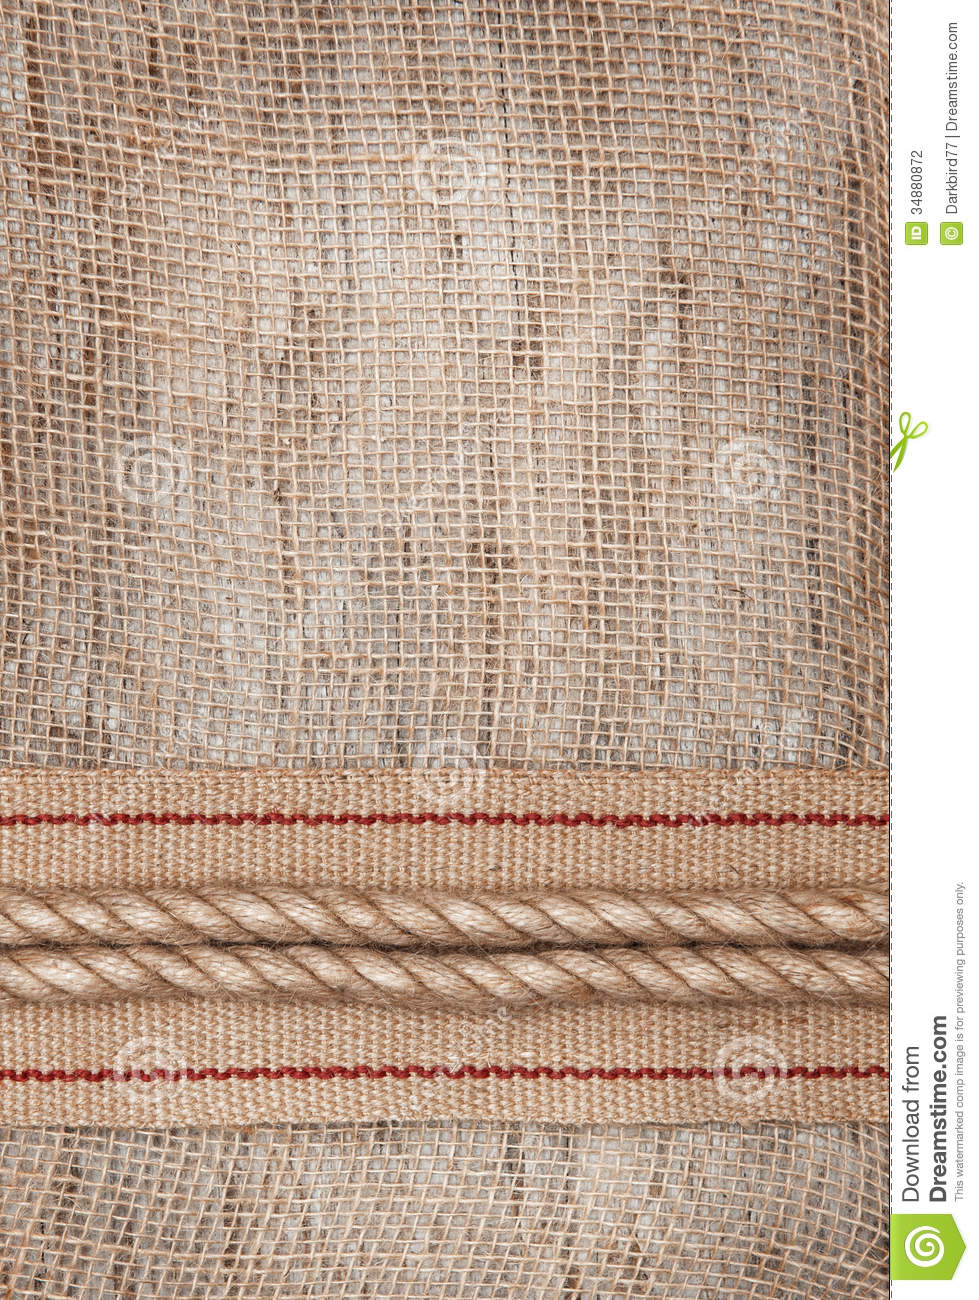 Burlap Background With Sacking Ribbon And Rope Stock Photography    